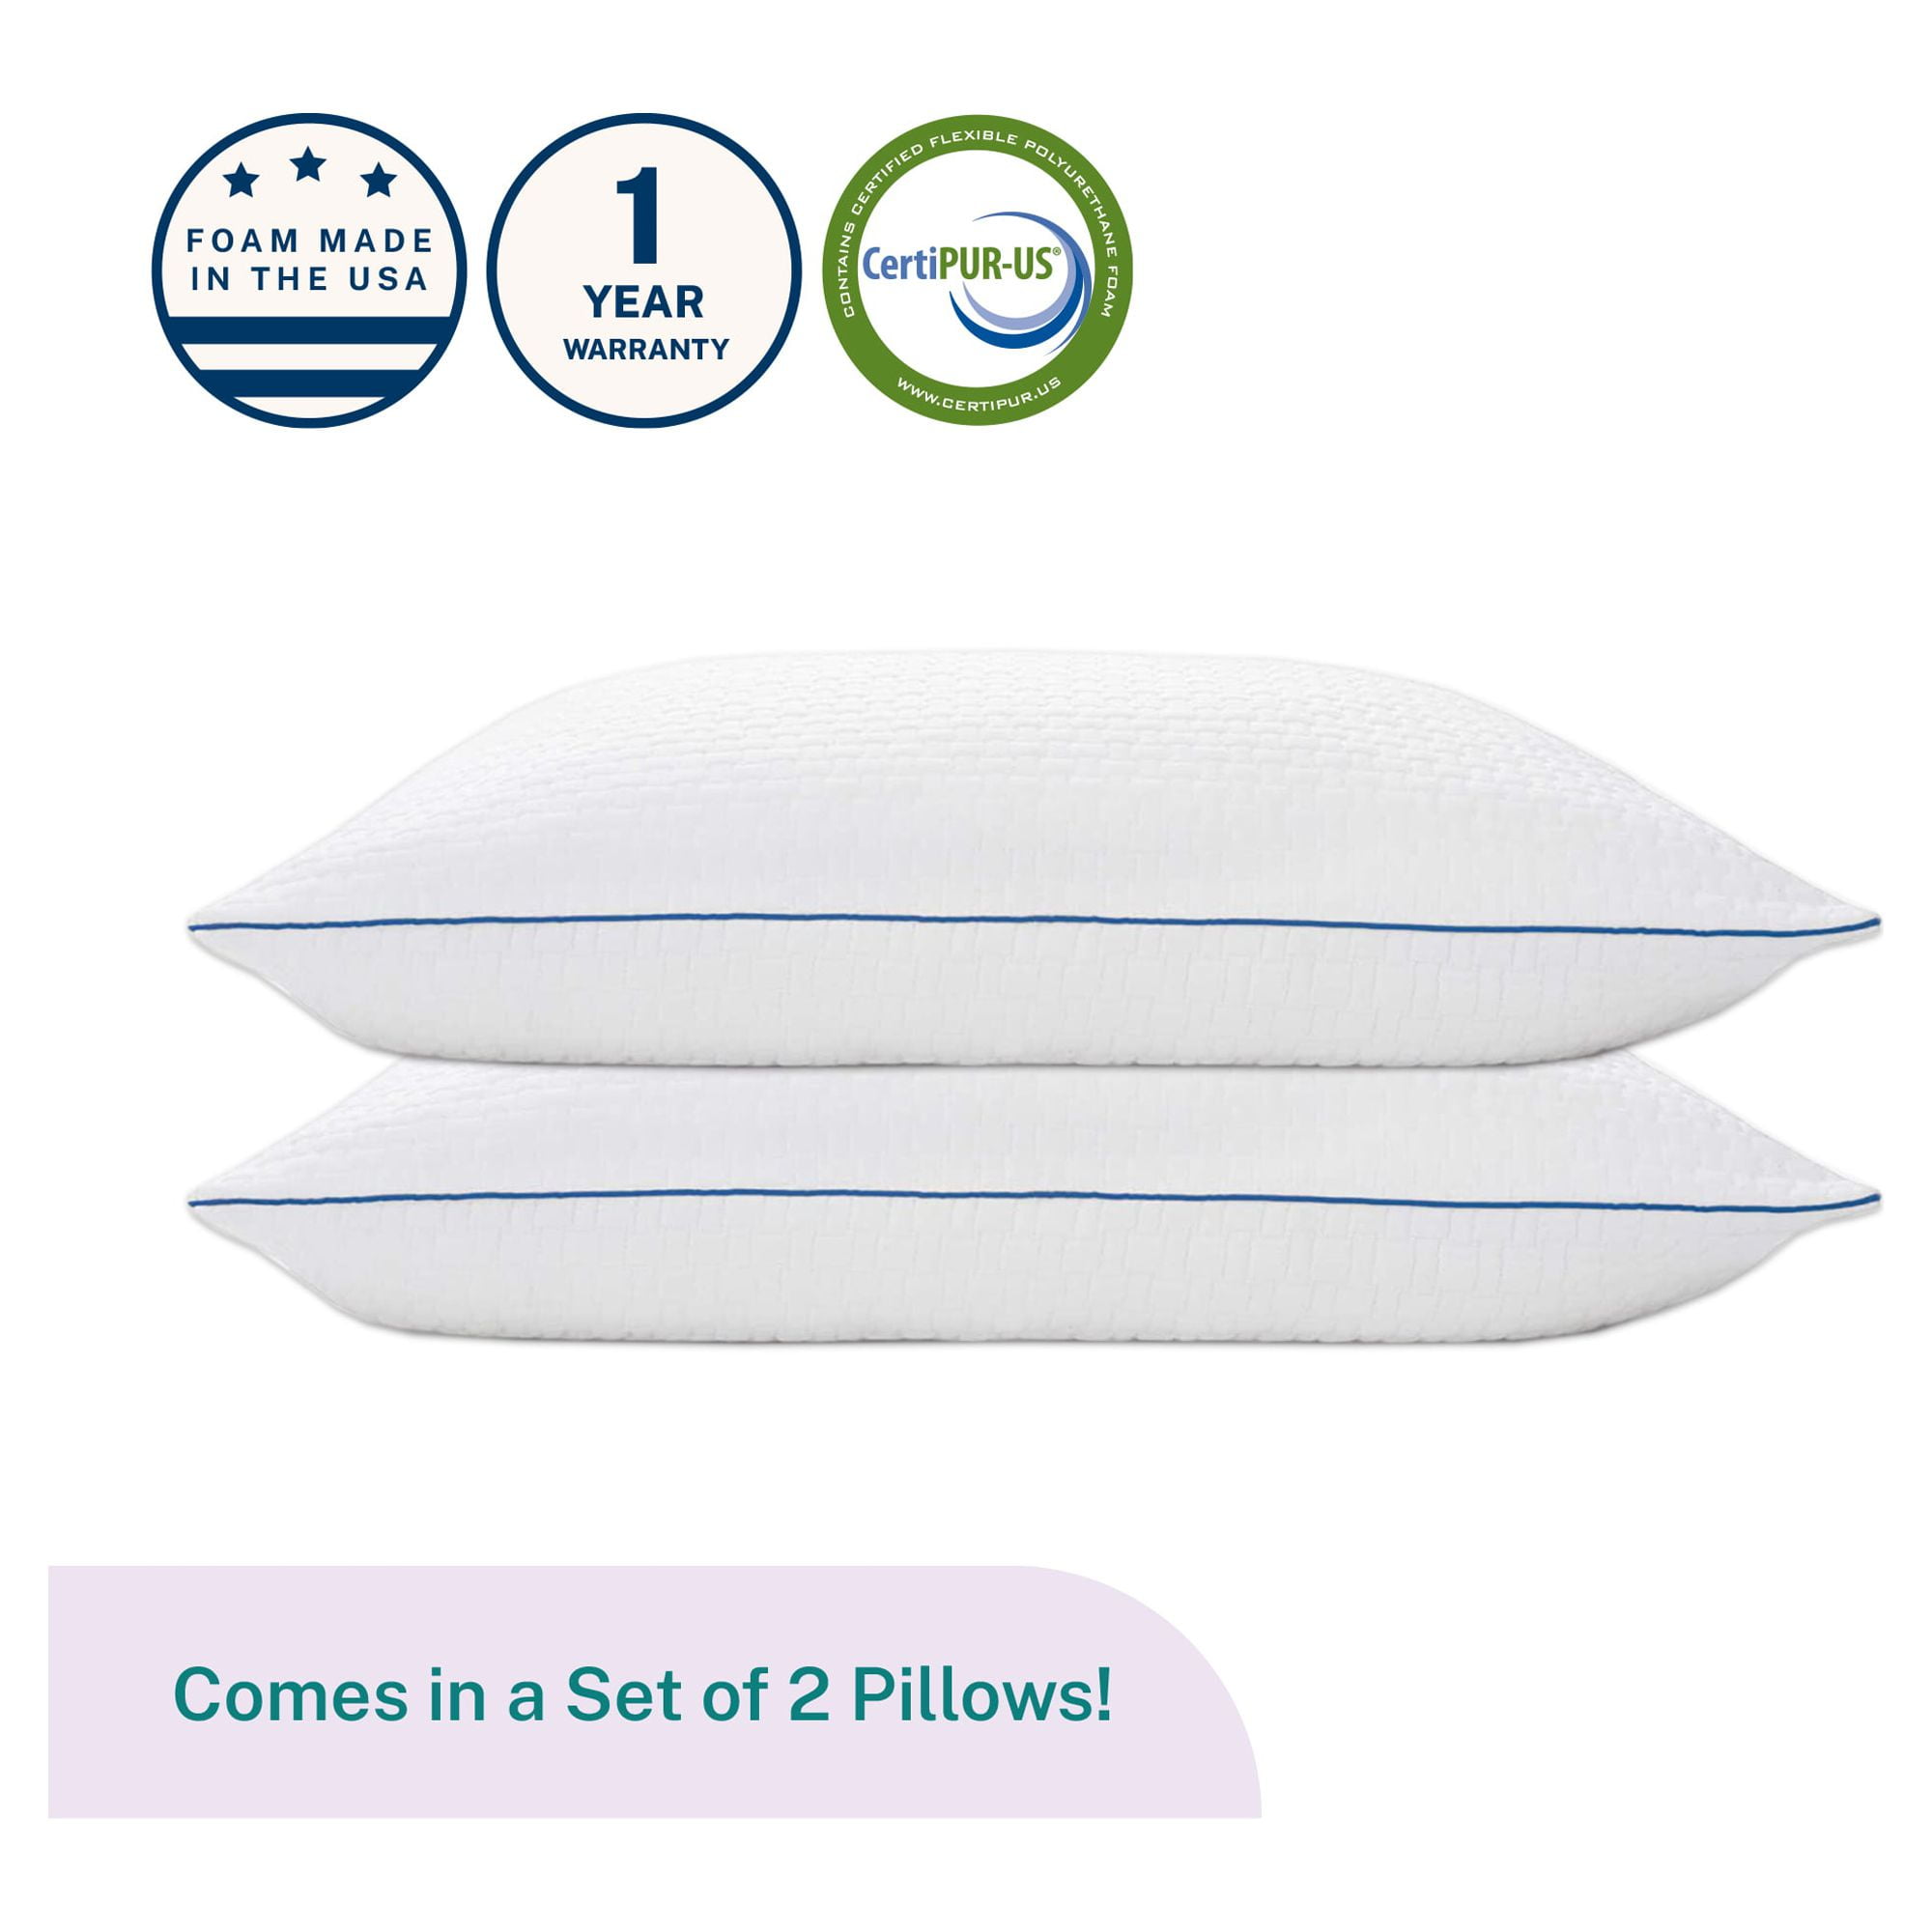 SEONSURO Shredded Memory Foam Pillows 2 Pack Queen Size 20 x 30 Inches,  Cooling Bed Pillow for Sleeping Set of 2, Adjustable Gel Pillows for  Stomach